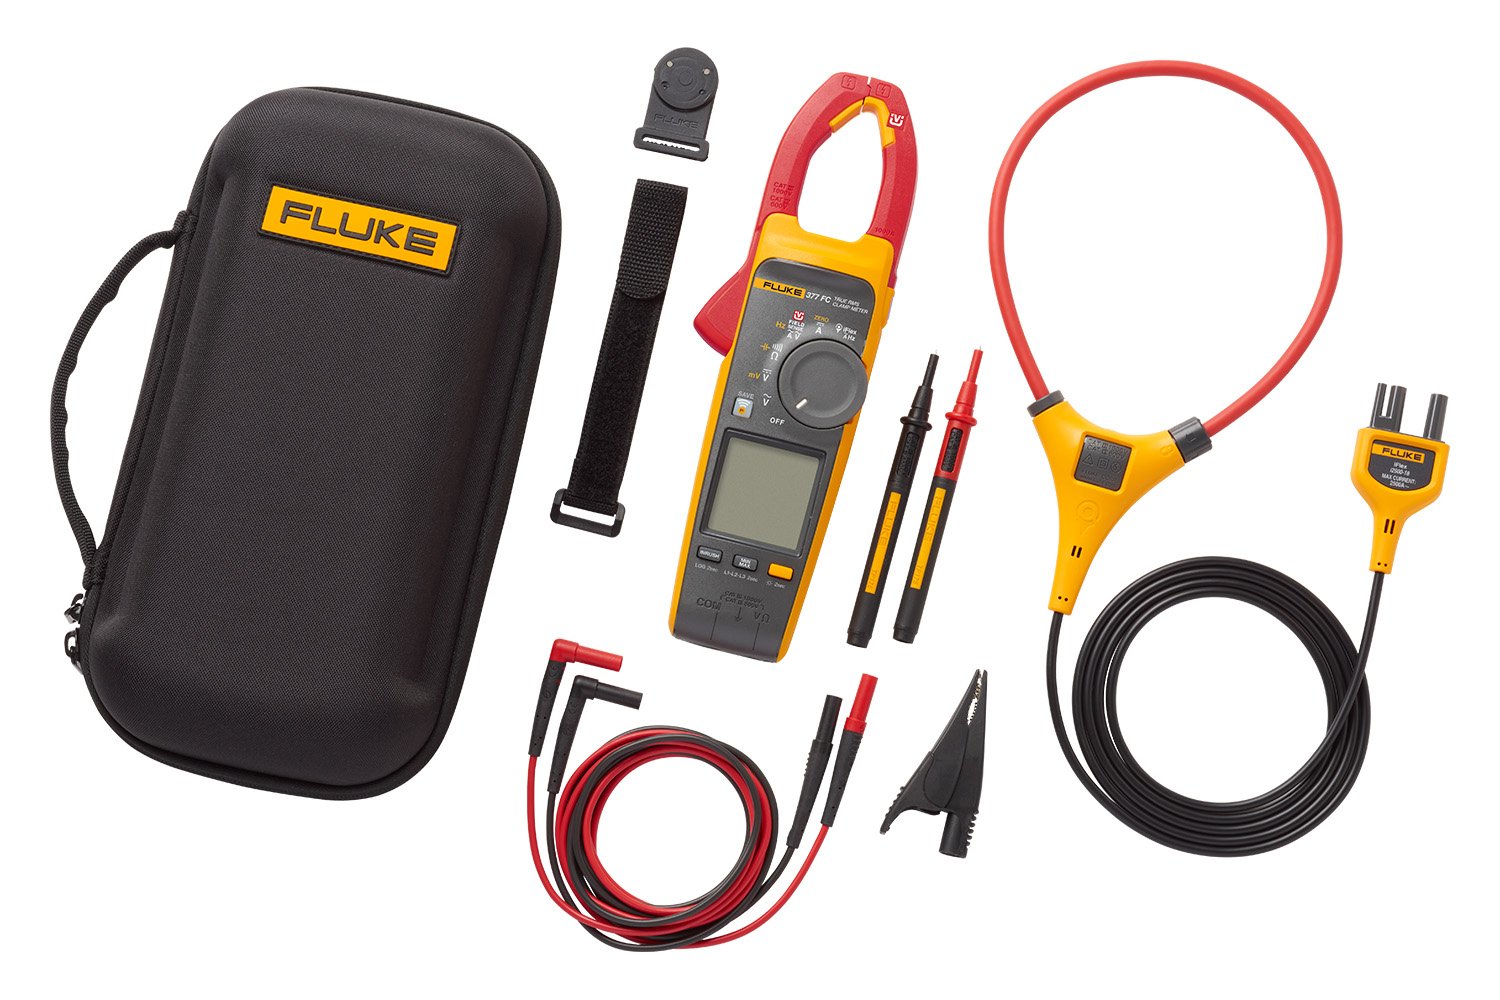 Fluke 377 FC Clamp Meter: True-rms Non-Contact Voltage AC/DC with iFlex